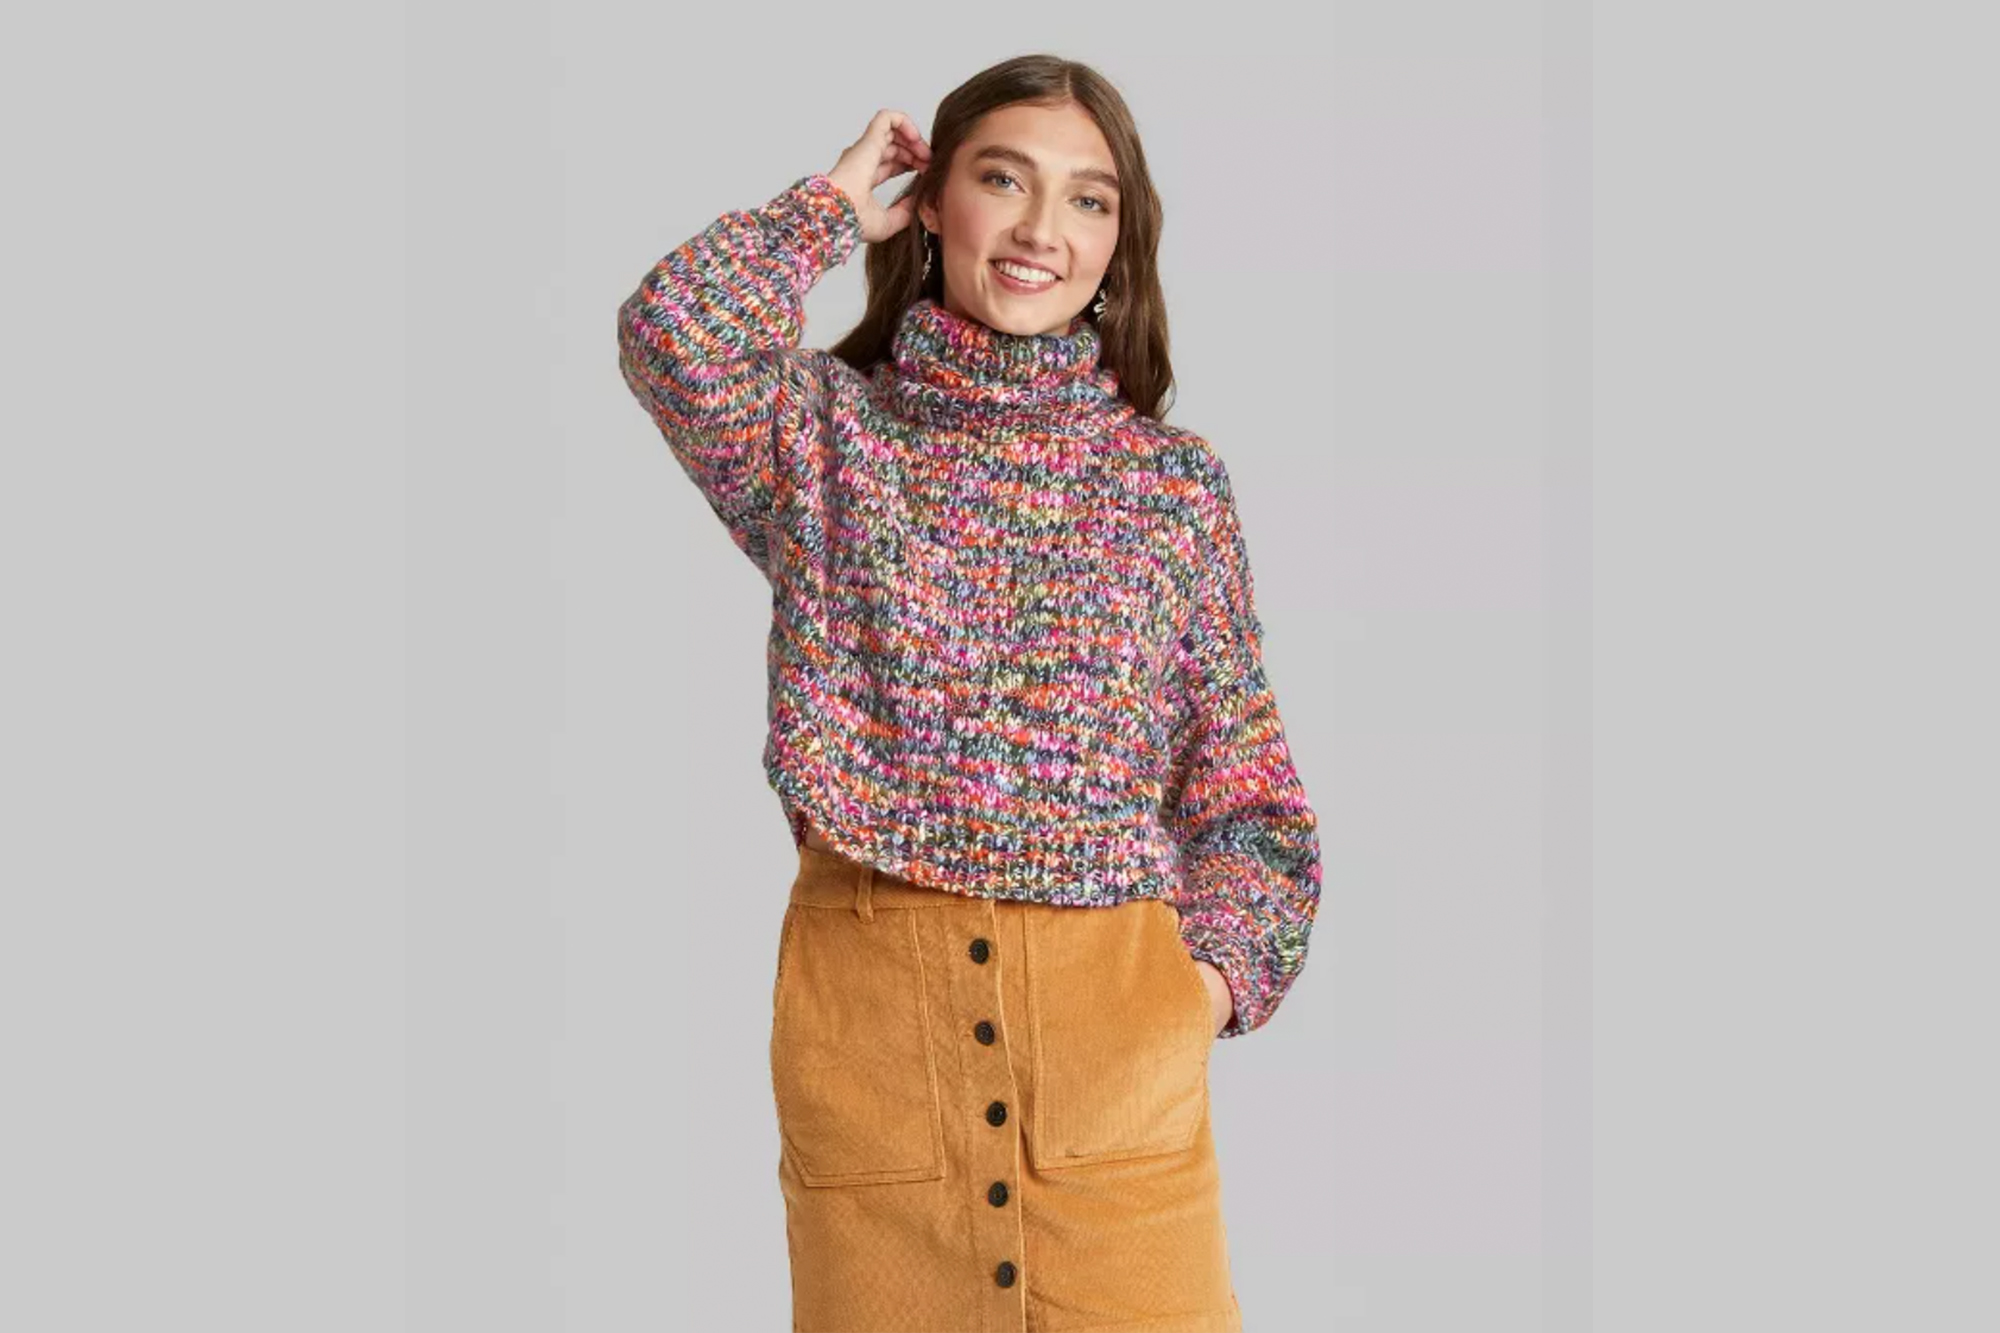 Target Has Such a Fun Modern Multi-Colored Sweater for Just $18